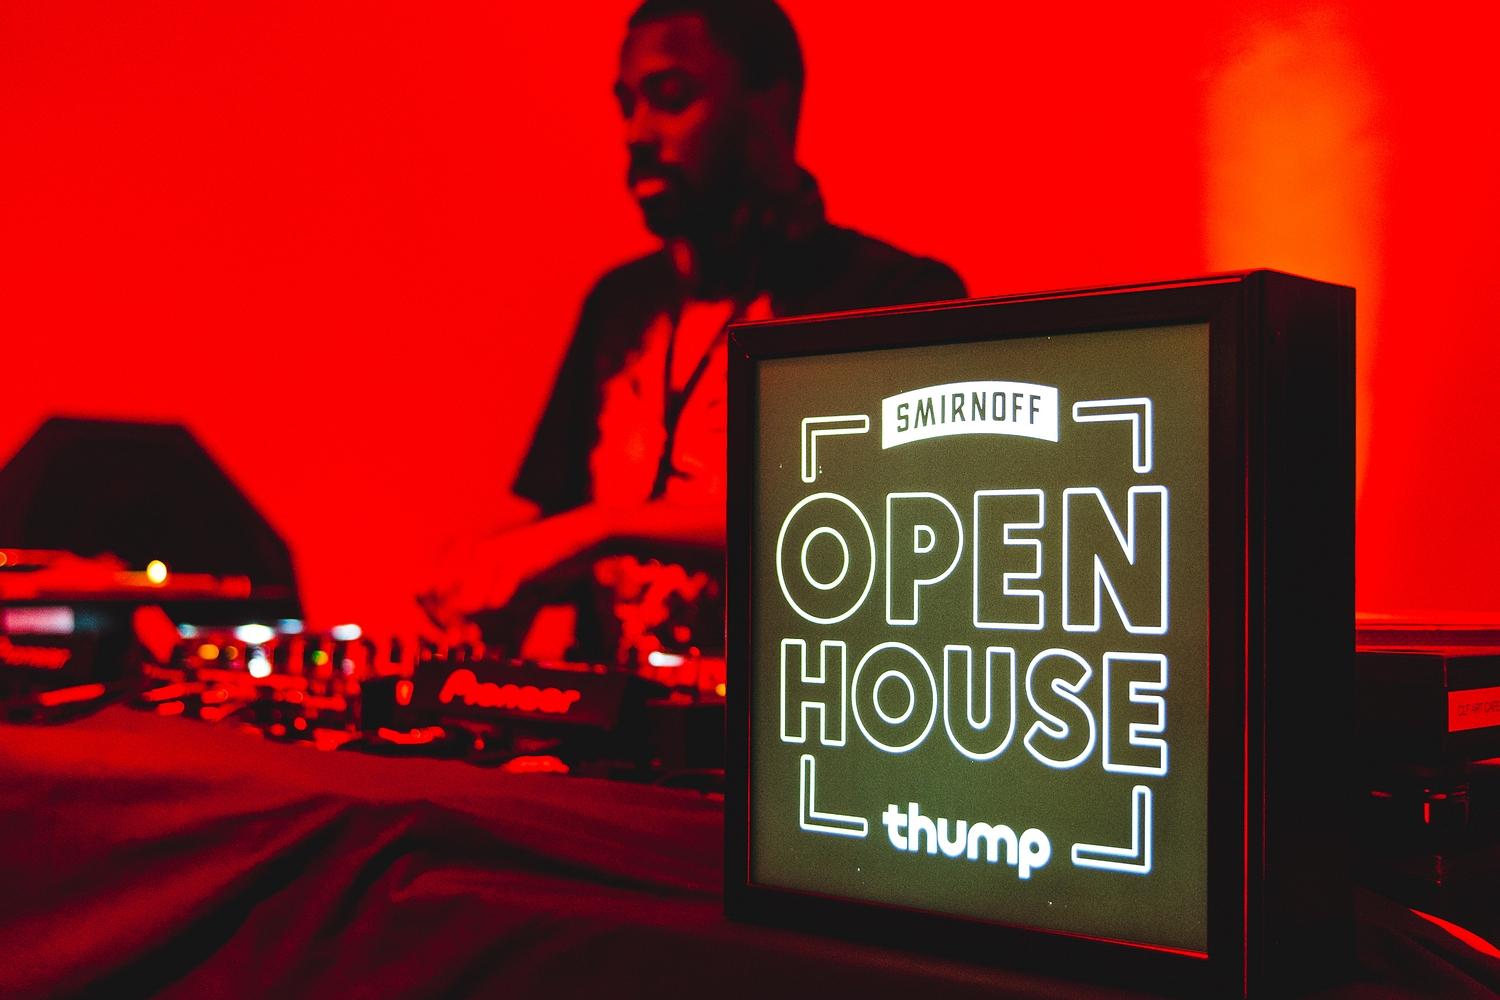 Silkie & Mala team up for THUMP & Smirnoff’s Open House party